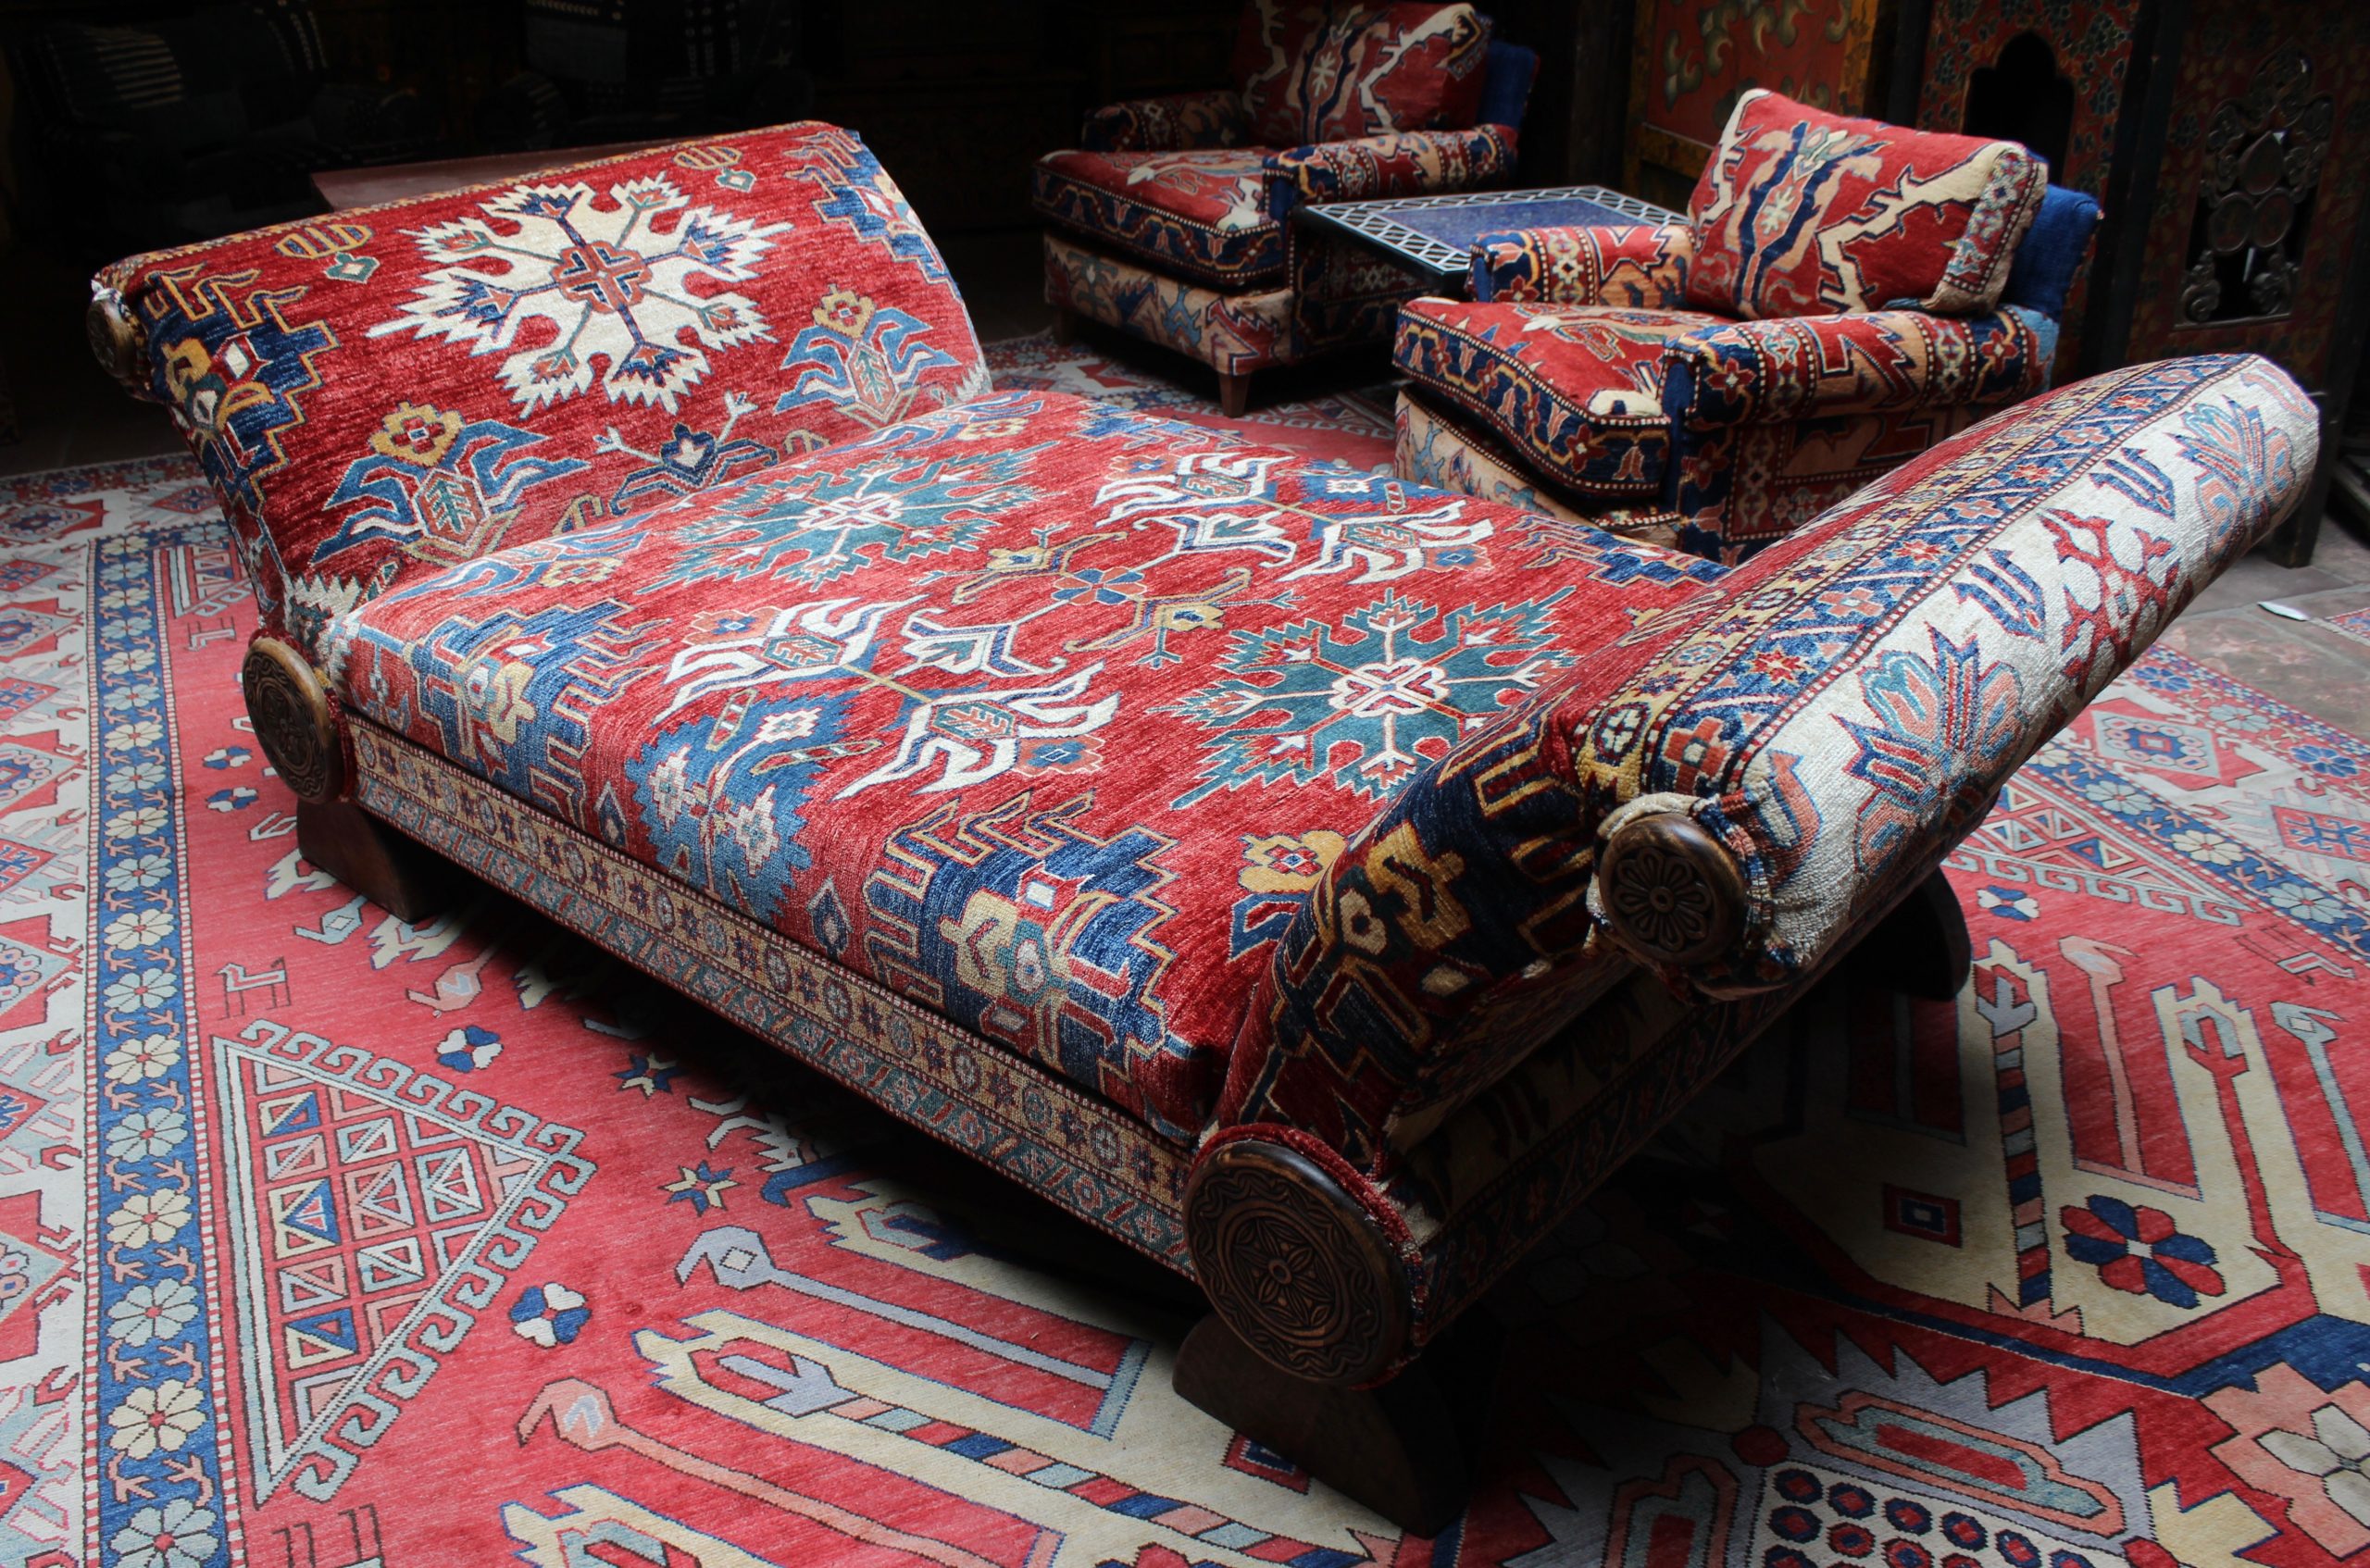 Kazak – Double Chaise Lounge© – Seret and Sons